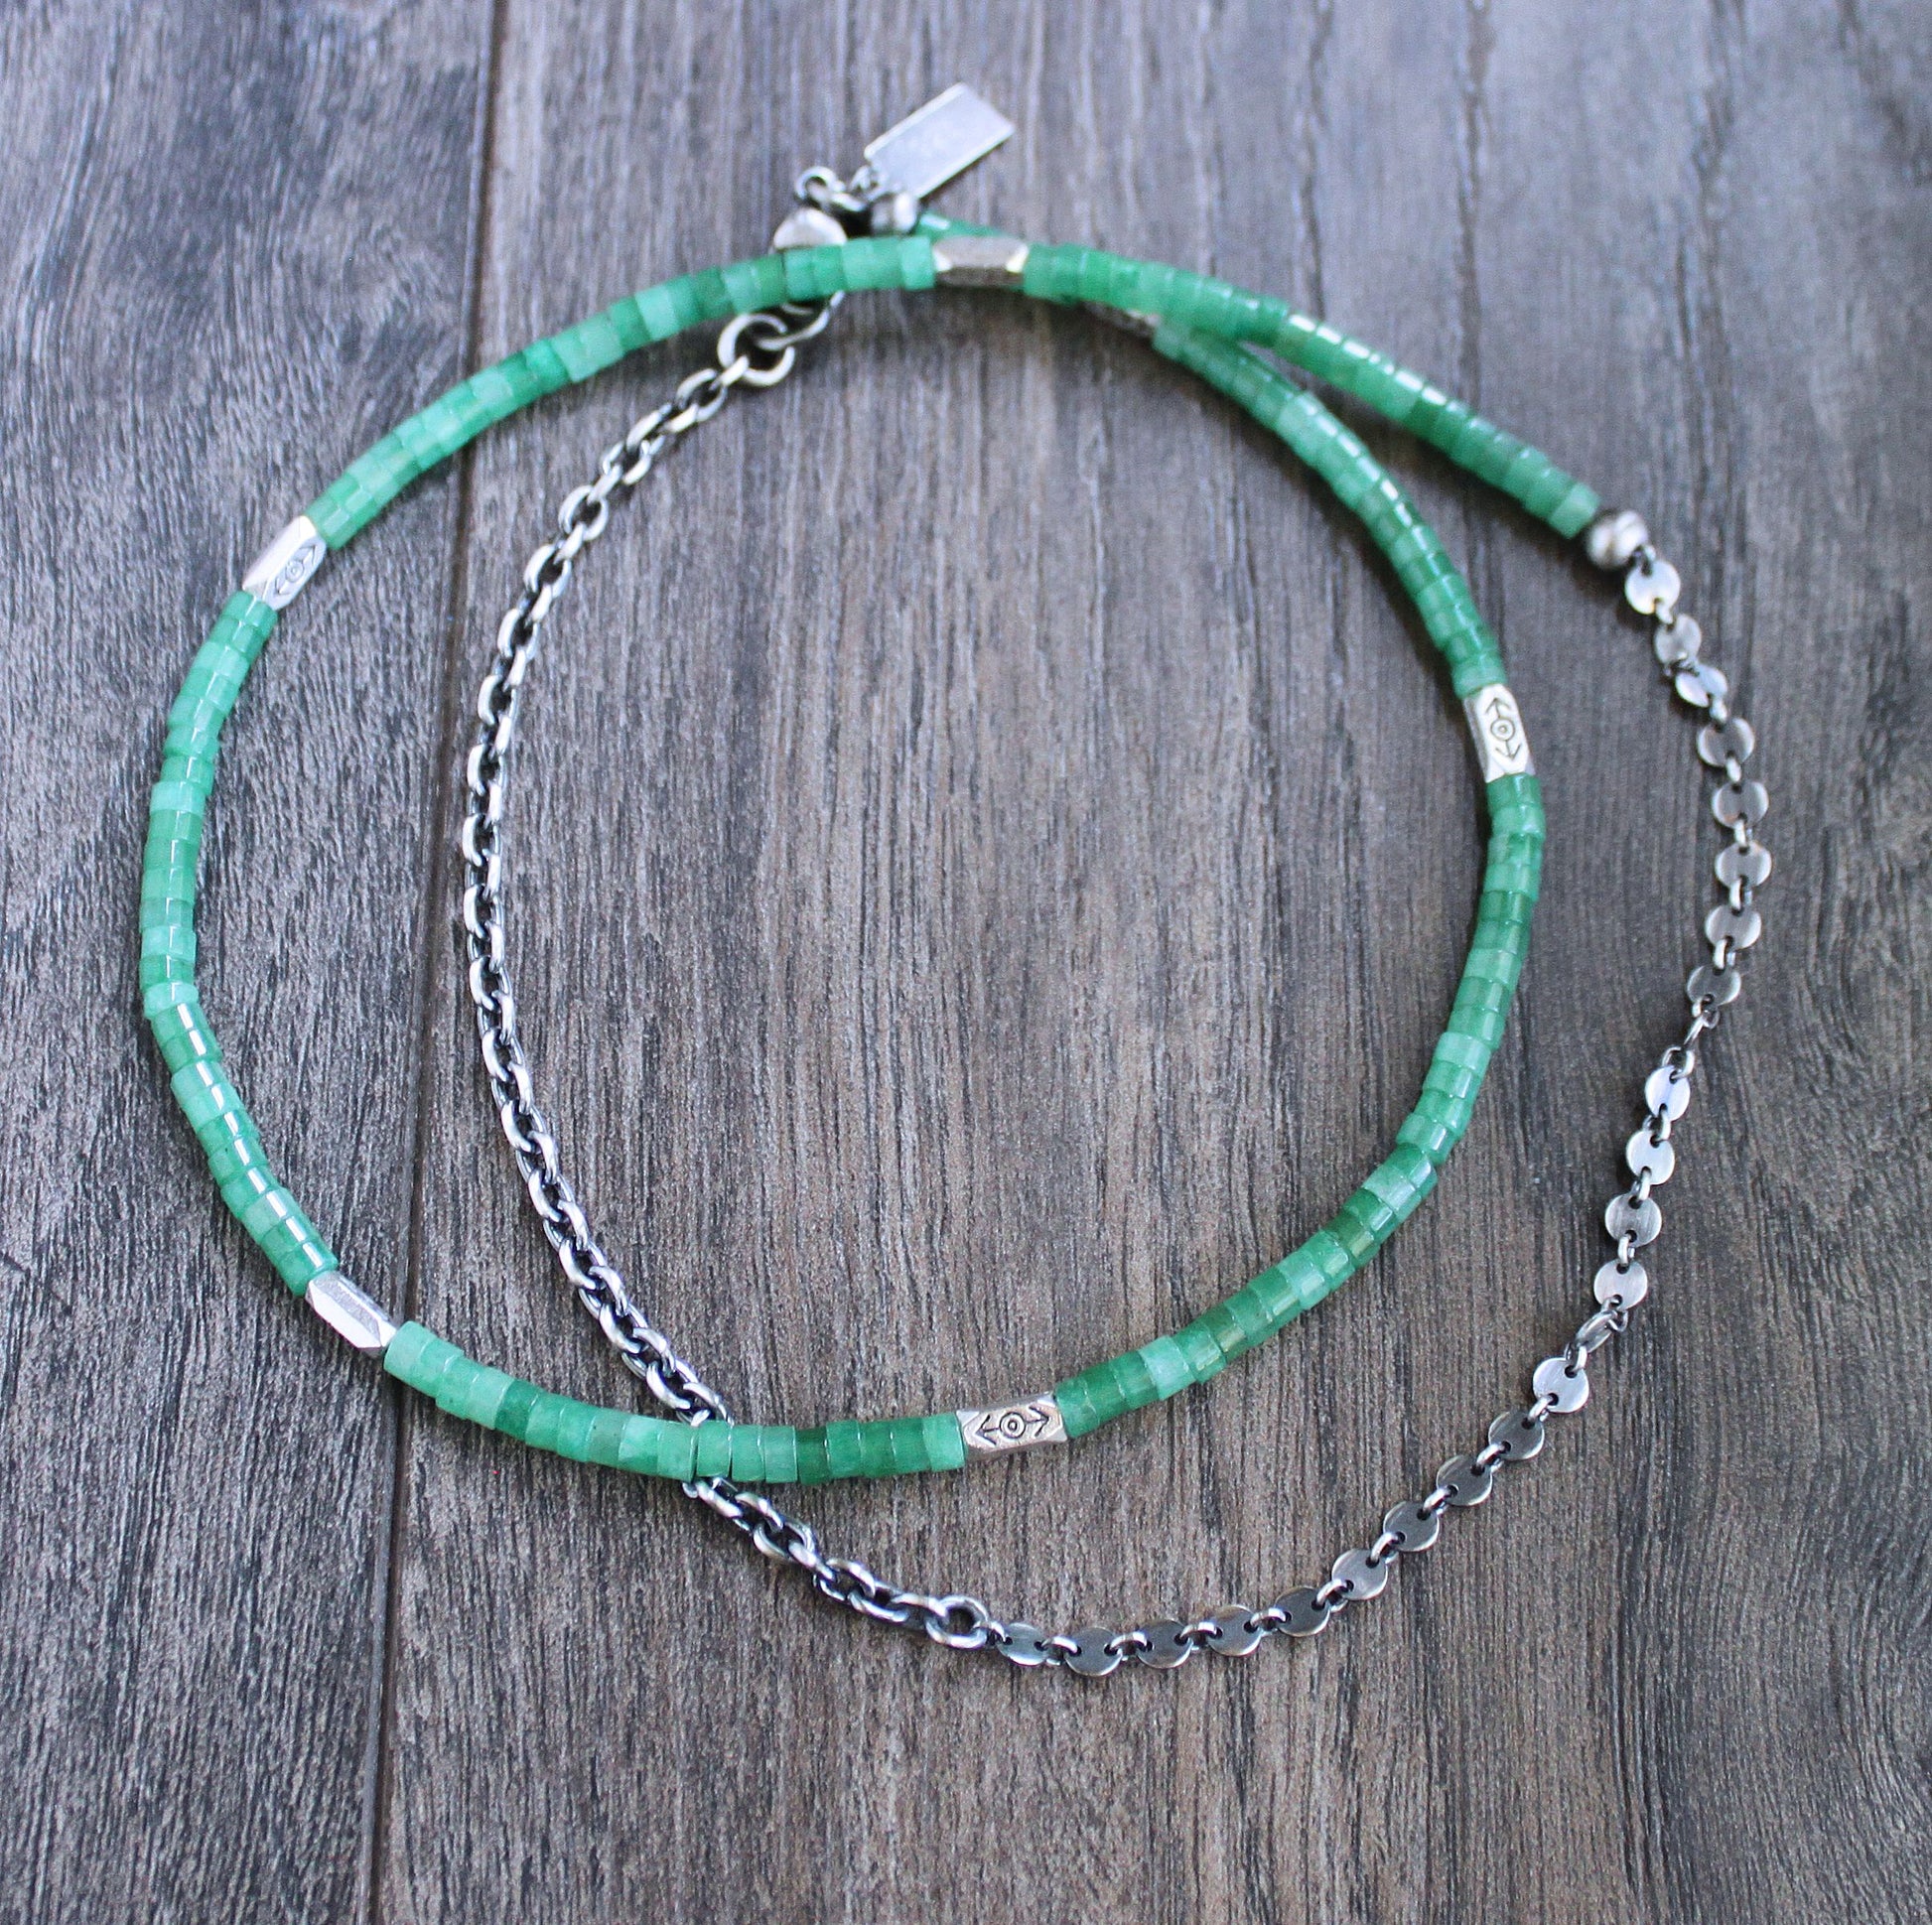 Green Aventurine Bead and Chain Necklace